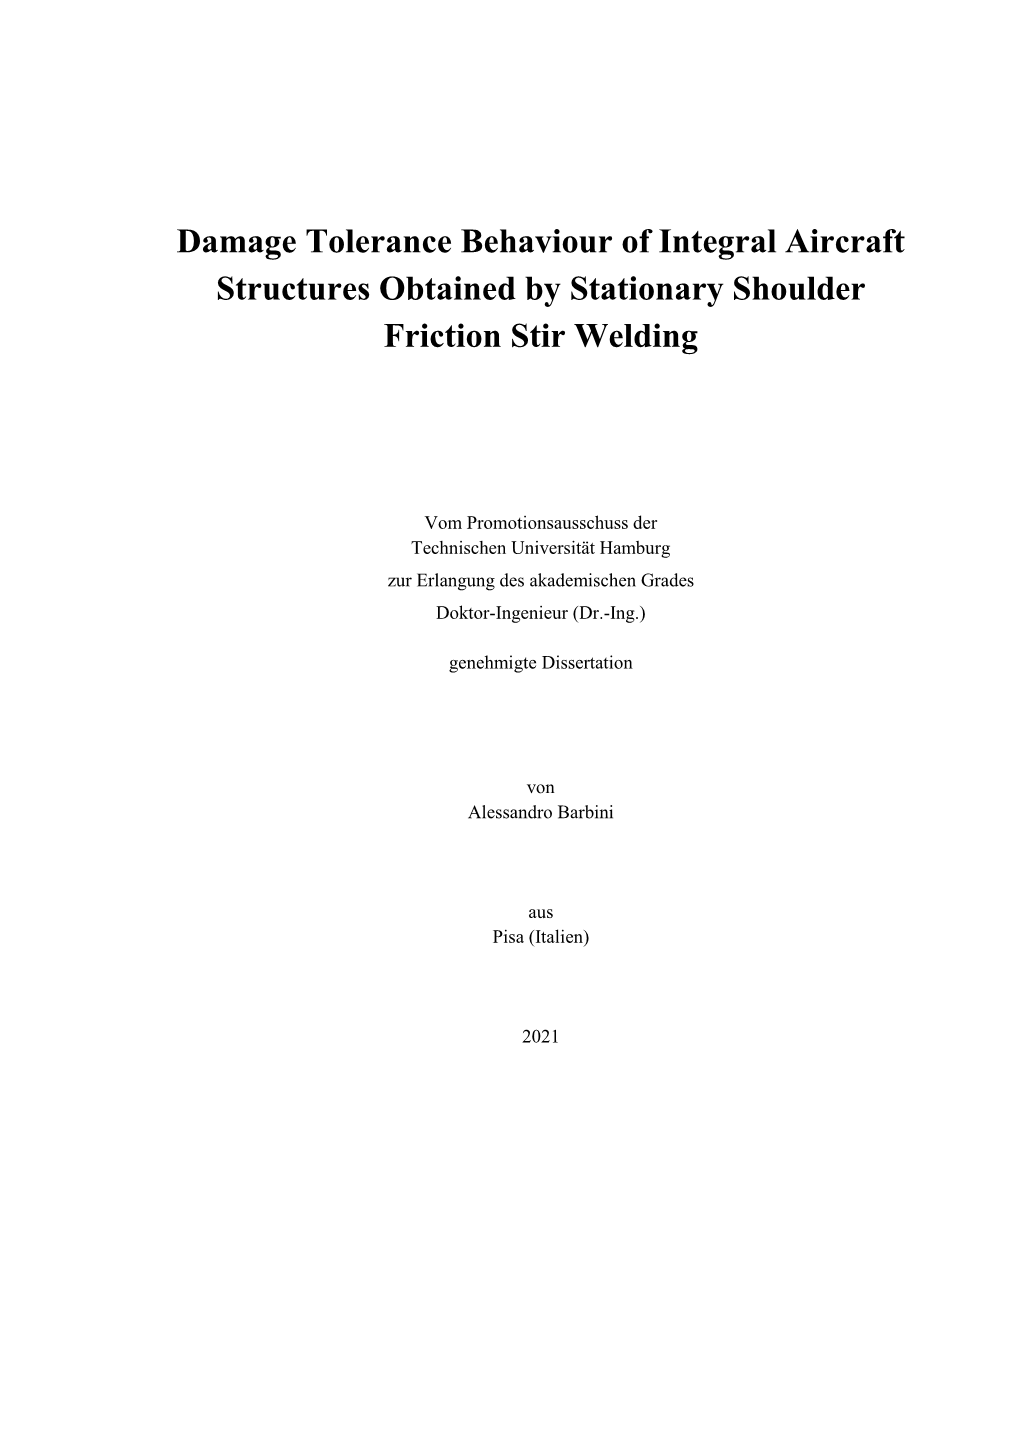 Damage Tolerance Behaviour of Integral Aircraft Structures Obtained by Stationary Shoulder Friction Stir Welding